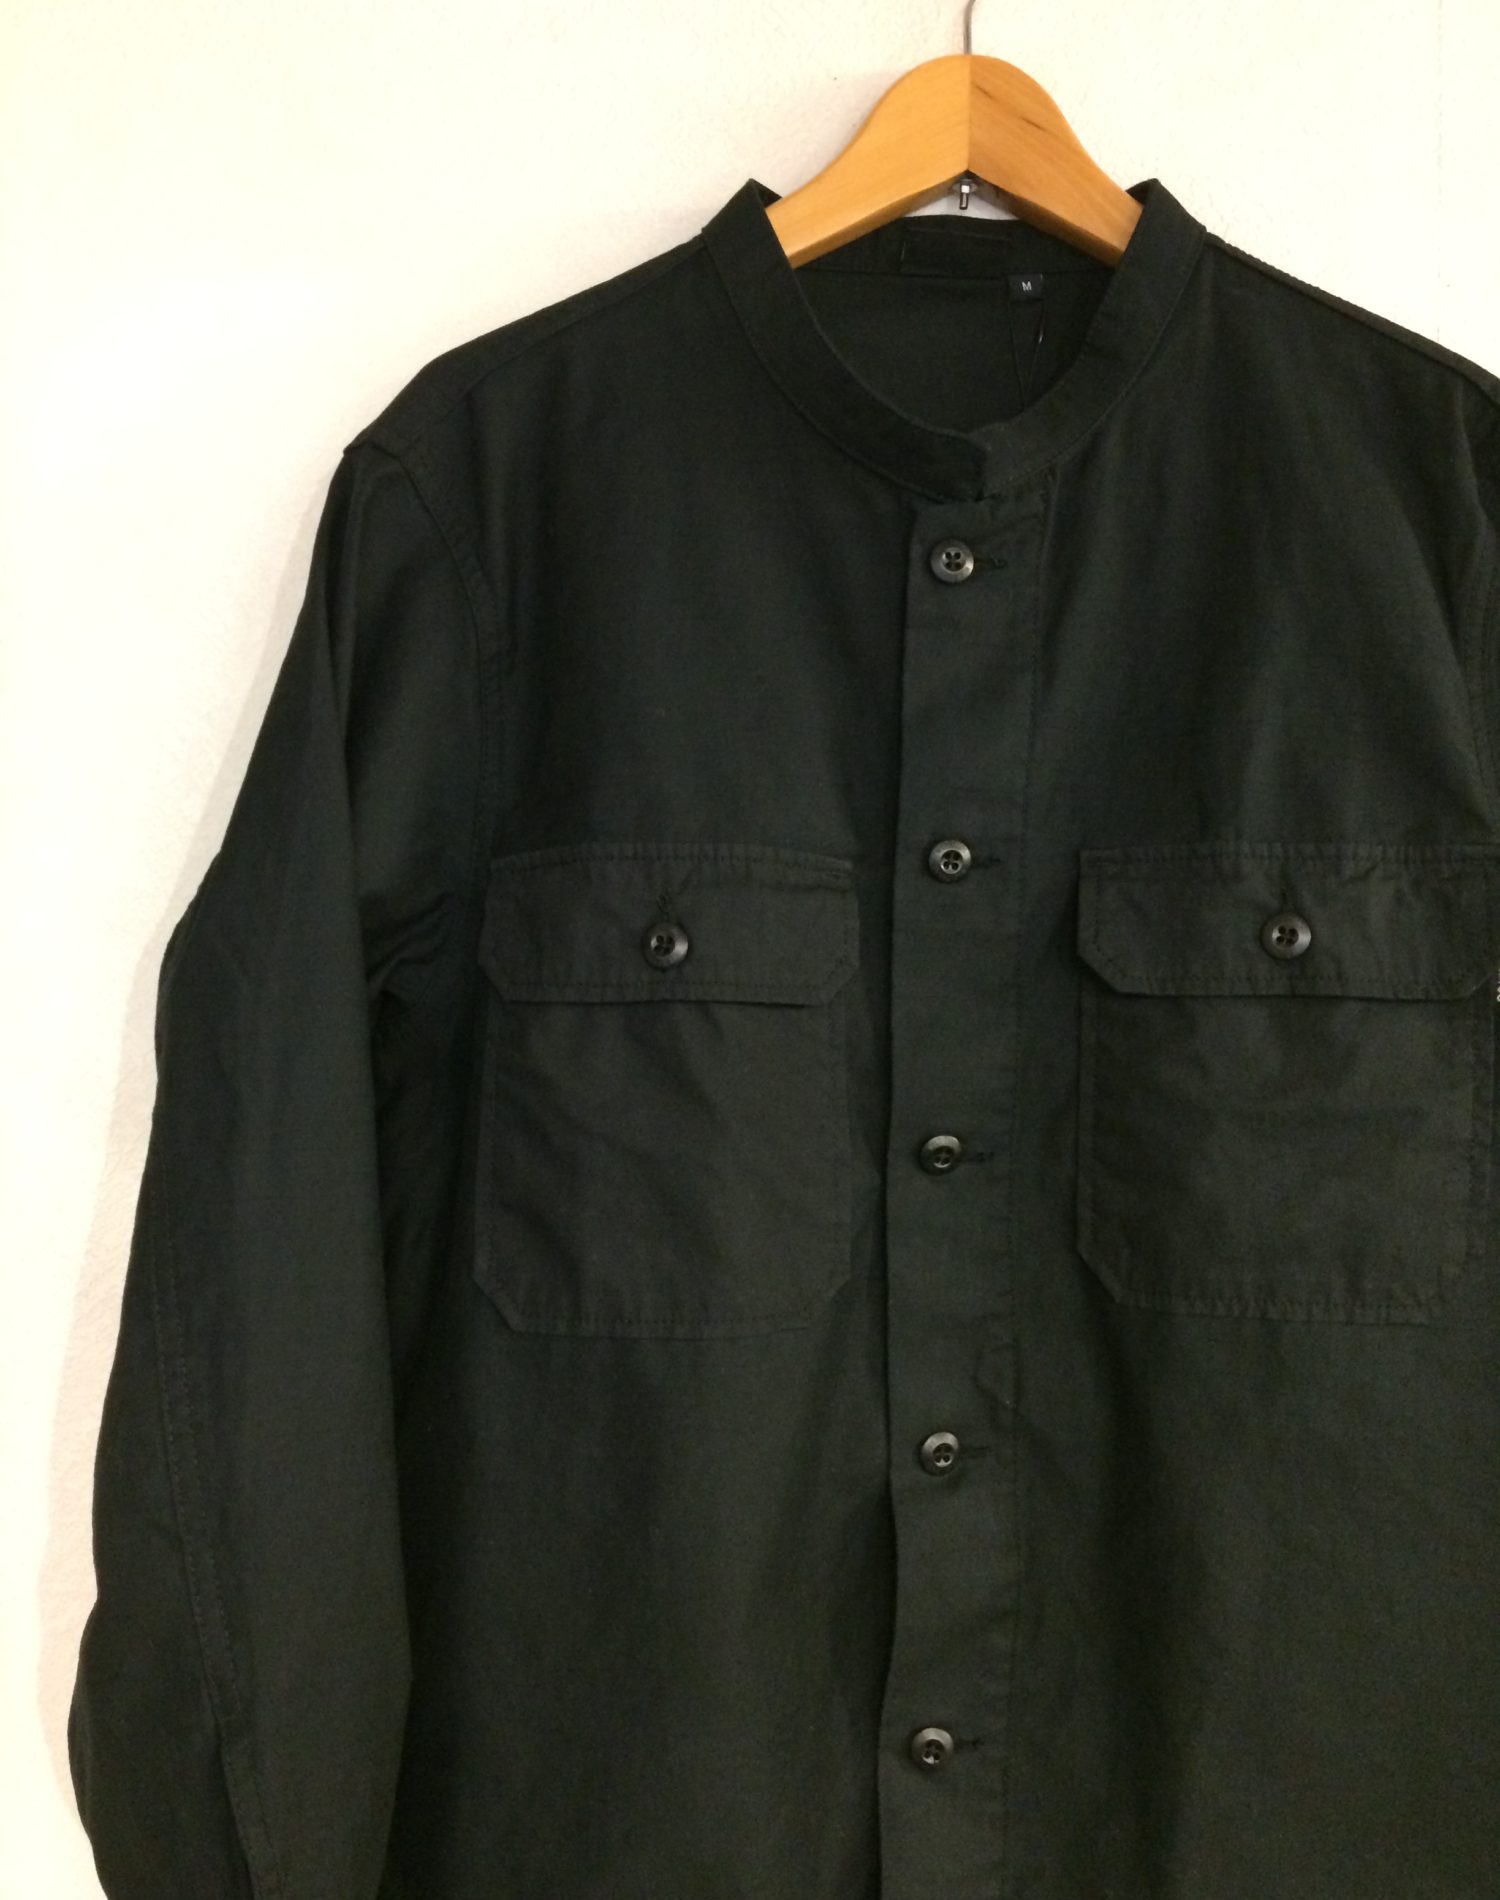 WILD THINGS☆BACKSATIN FIELD CPO SHIRT | 福岡市早良区西新にある 